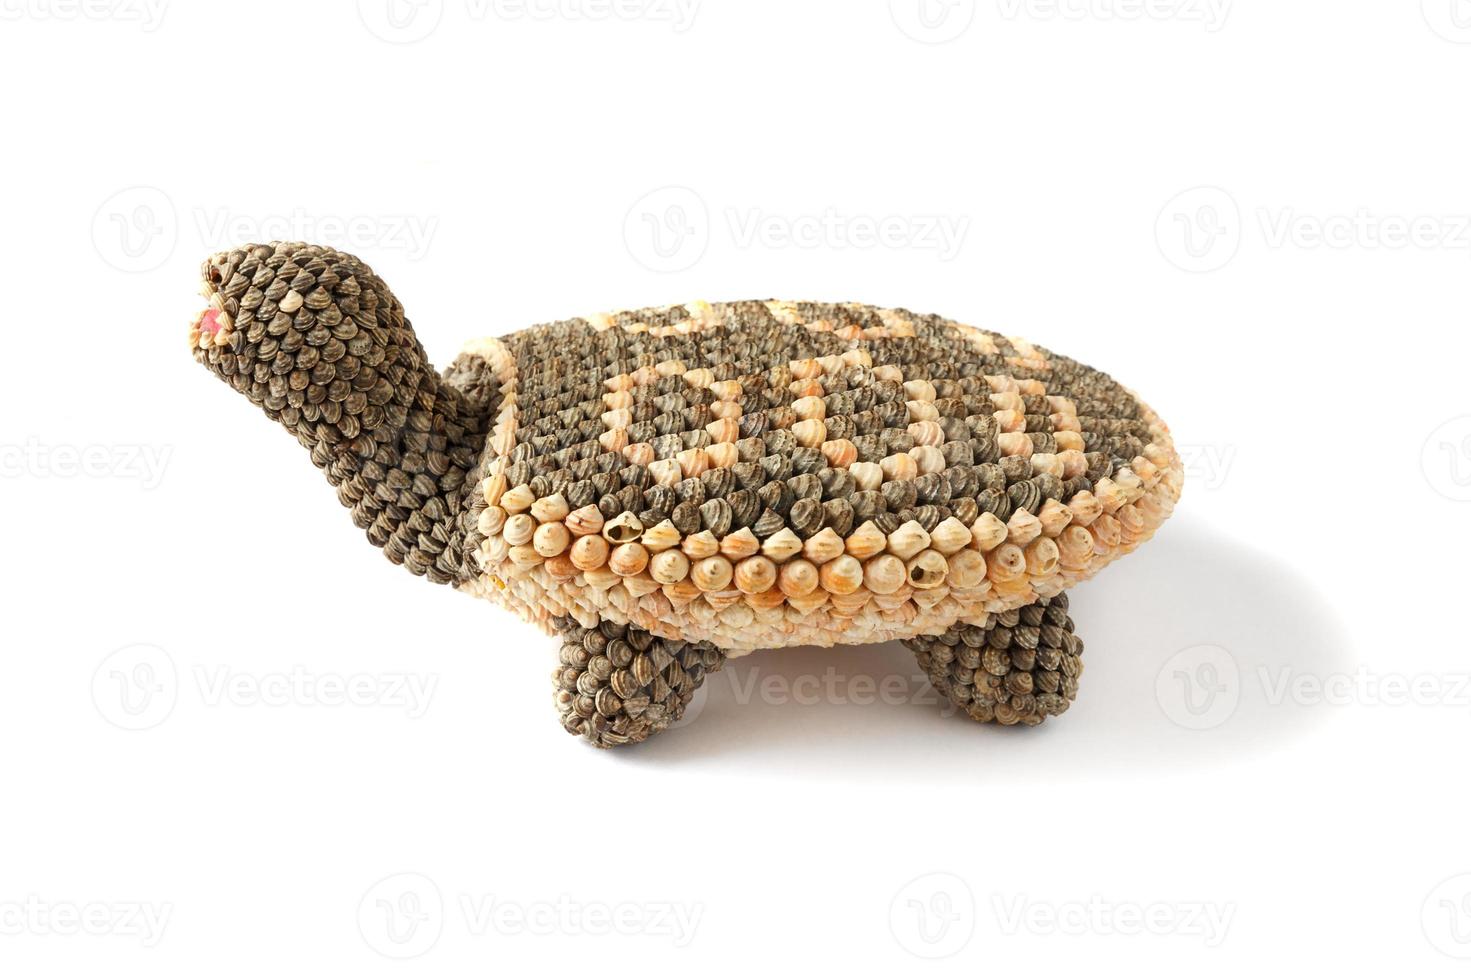 A turtle figurine on a white background covered with seashells. photo